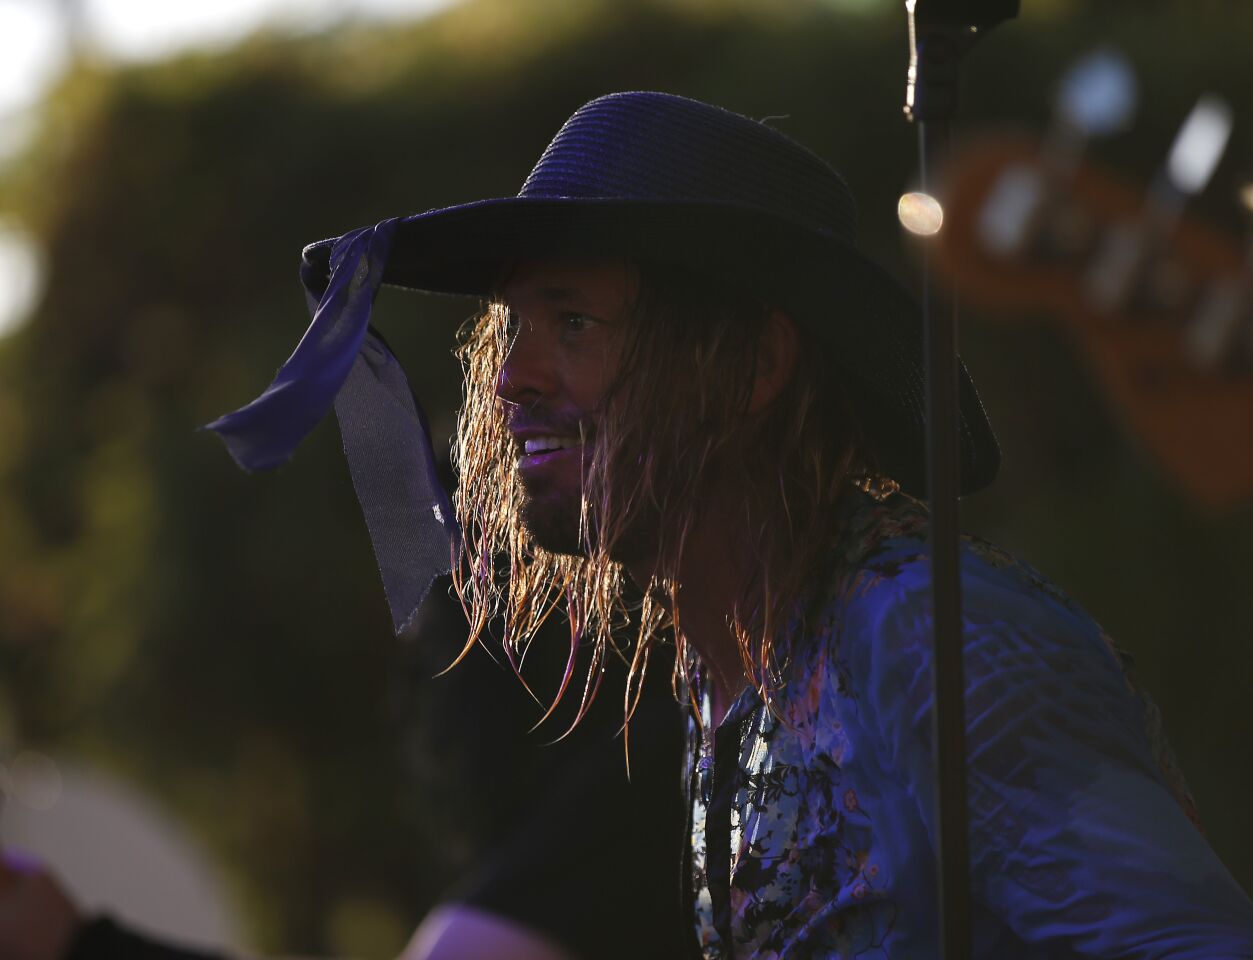 Taylor Hawkins of Chevy Metal performs at KAABOO Del Mar on Sept. 14, 2019.